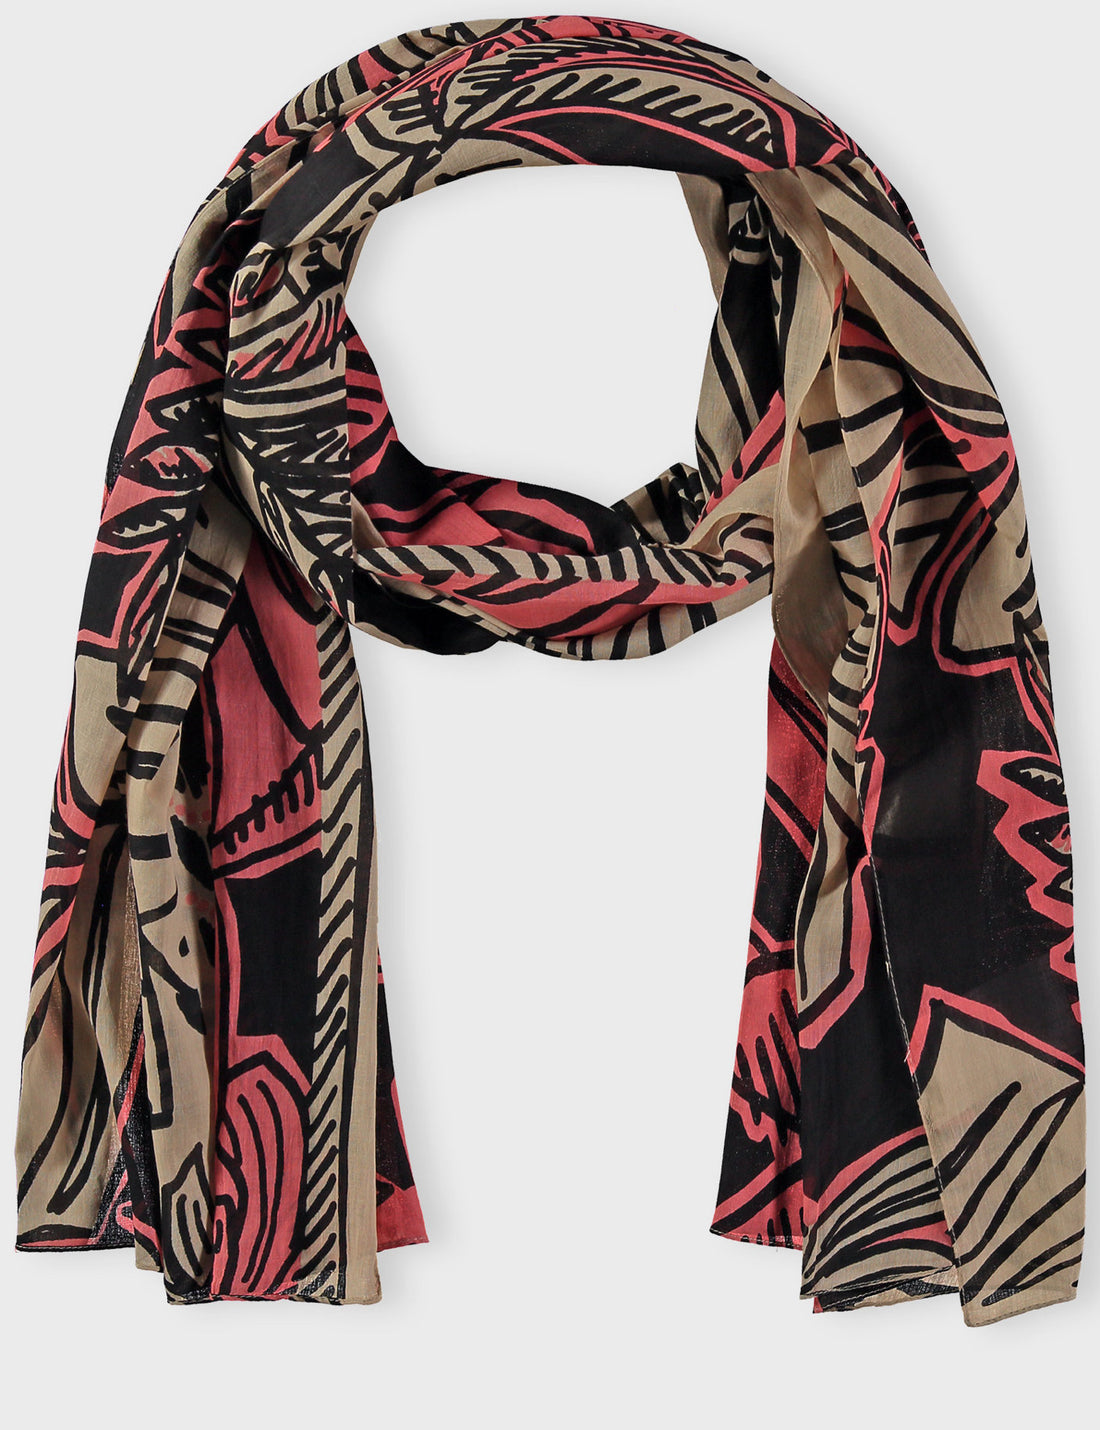 Floral Patterned Cotton Scarf_301000-72004_9018_02